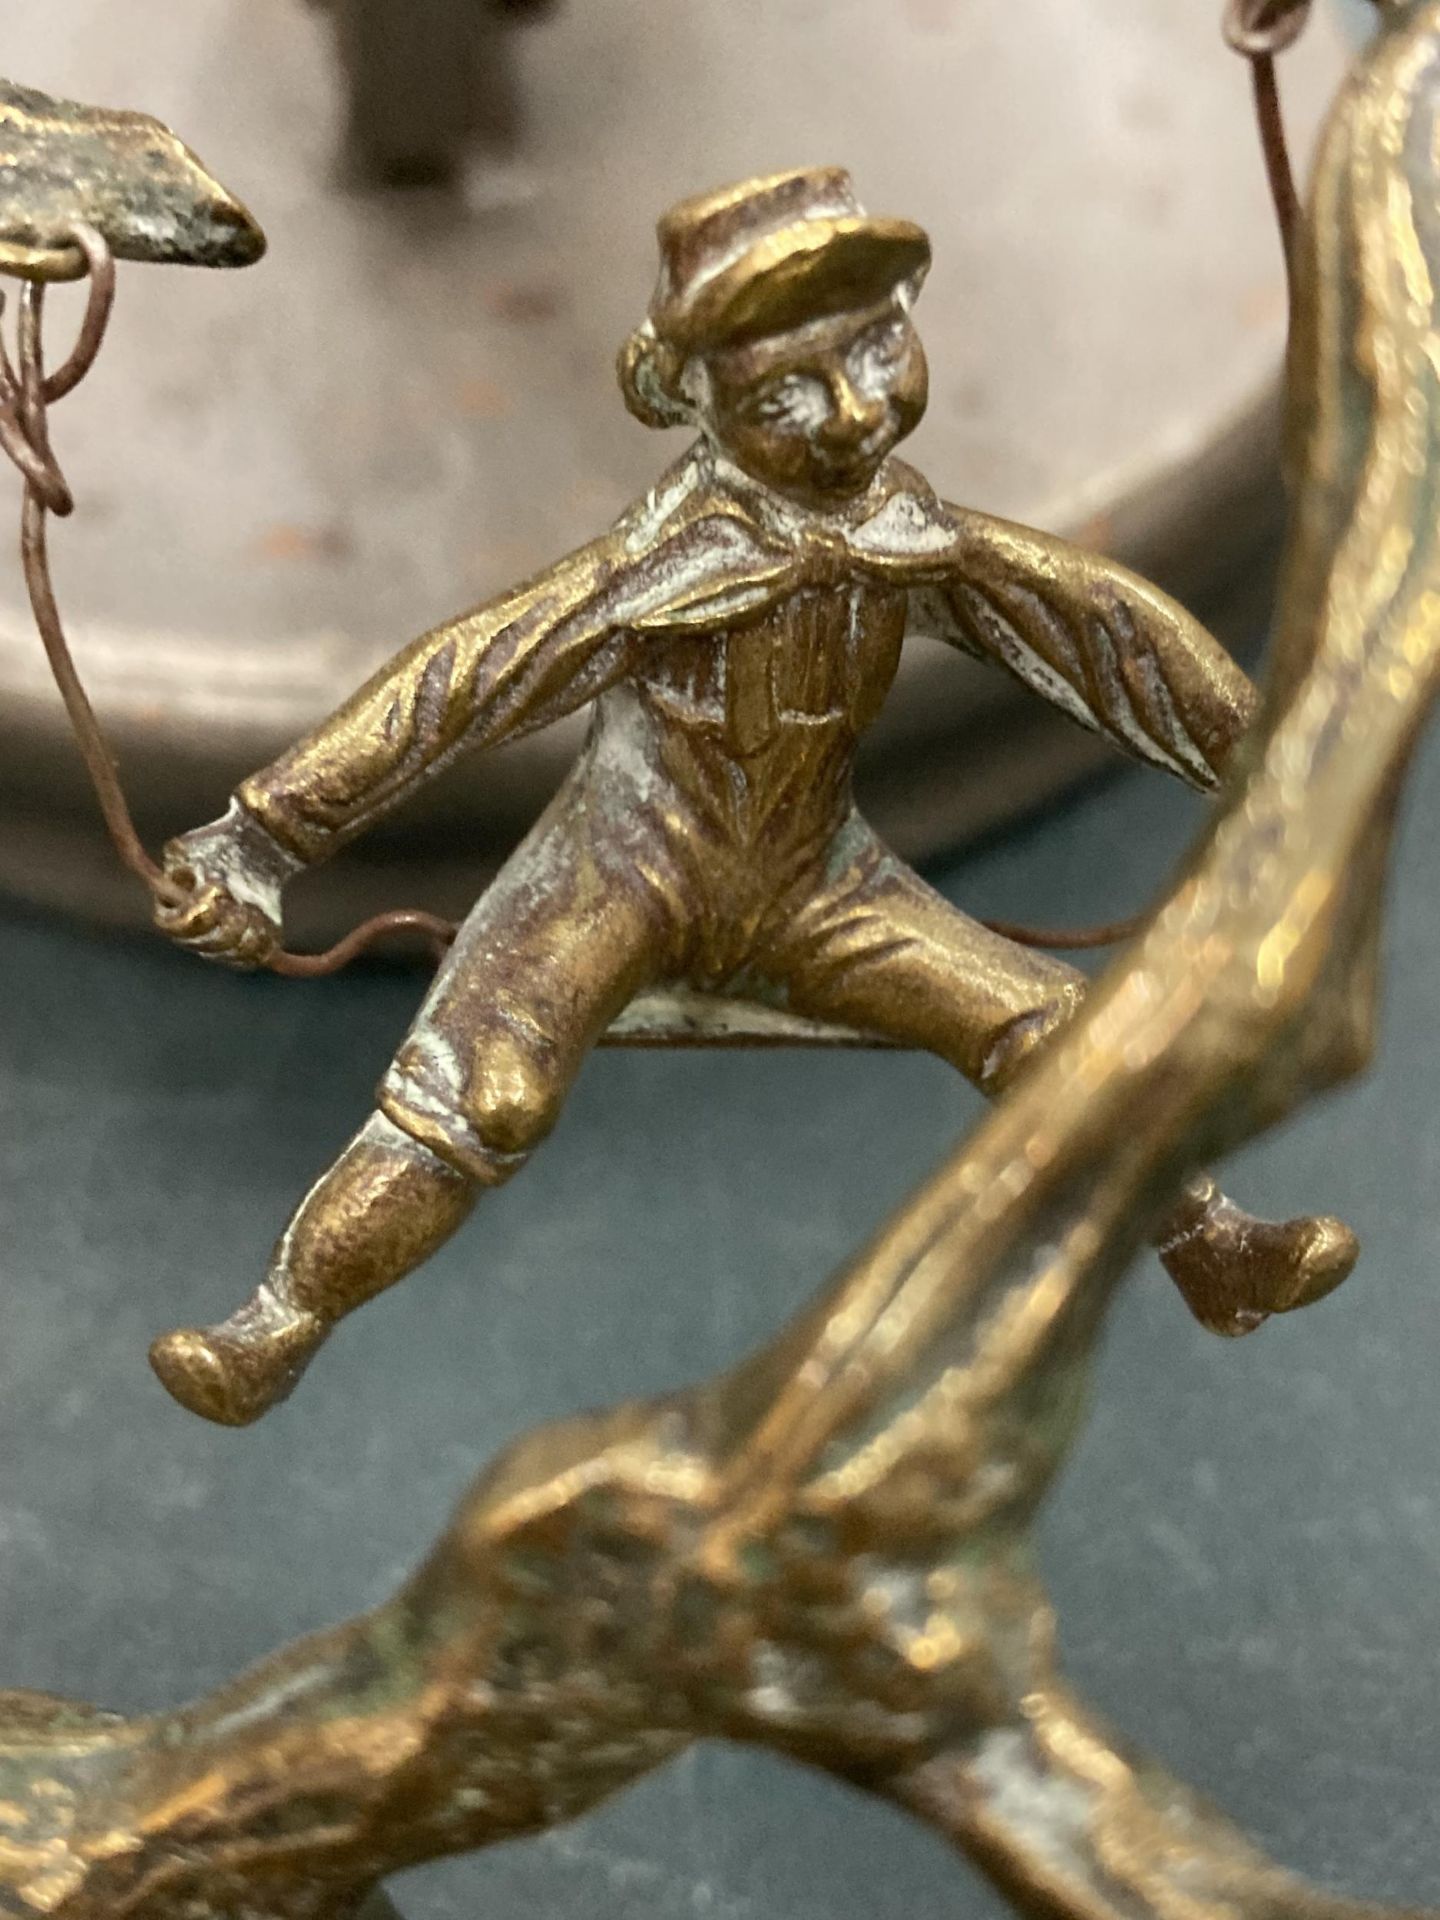 A VINTAGE NOVELTY BRASS INKWELL WITH A SINGING BOY IN A TREE - Image 3 of 4